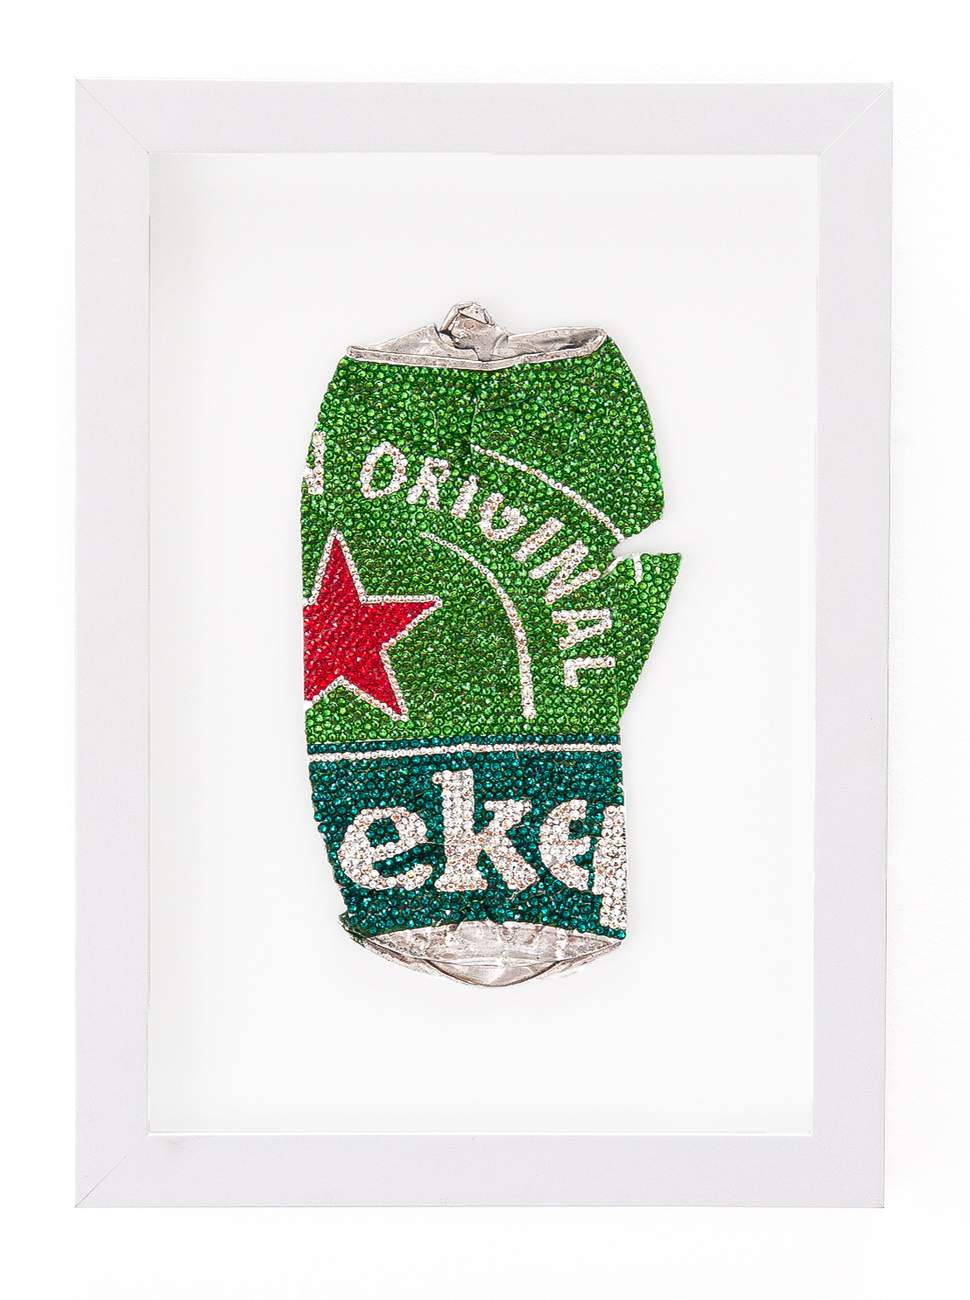 Preview image for Can (Heineken)